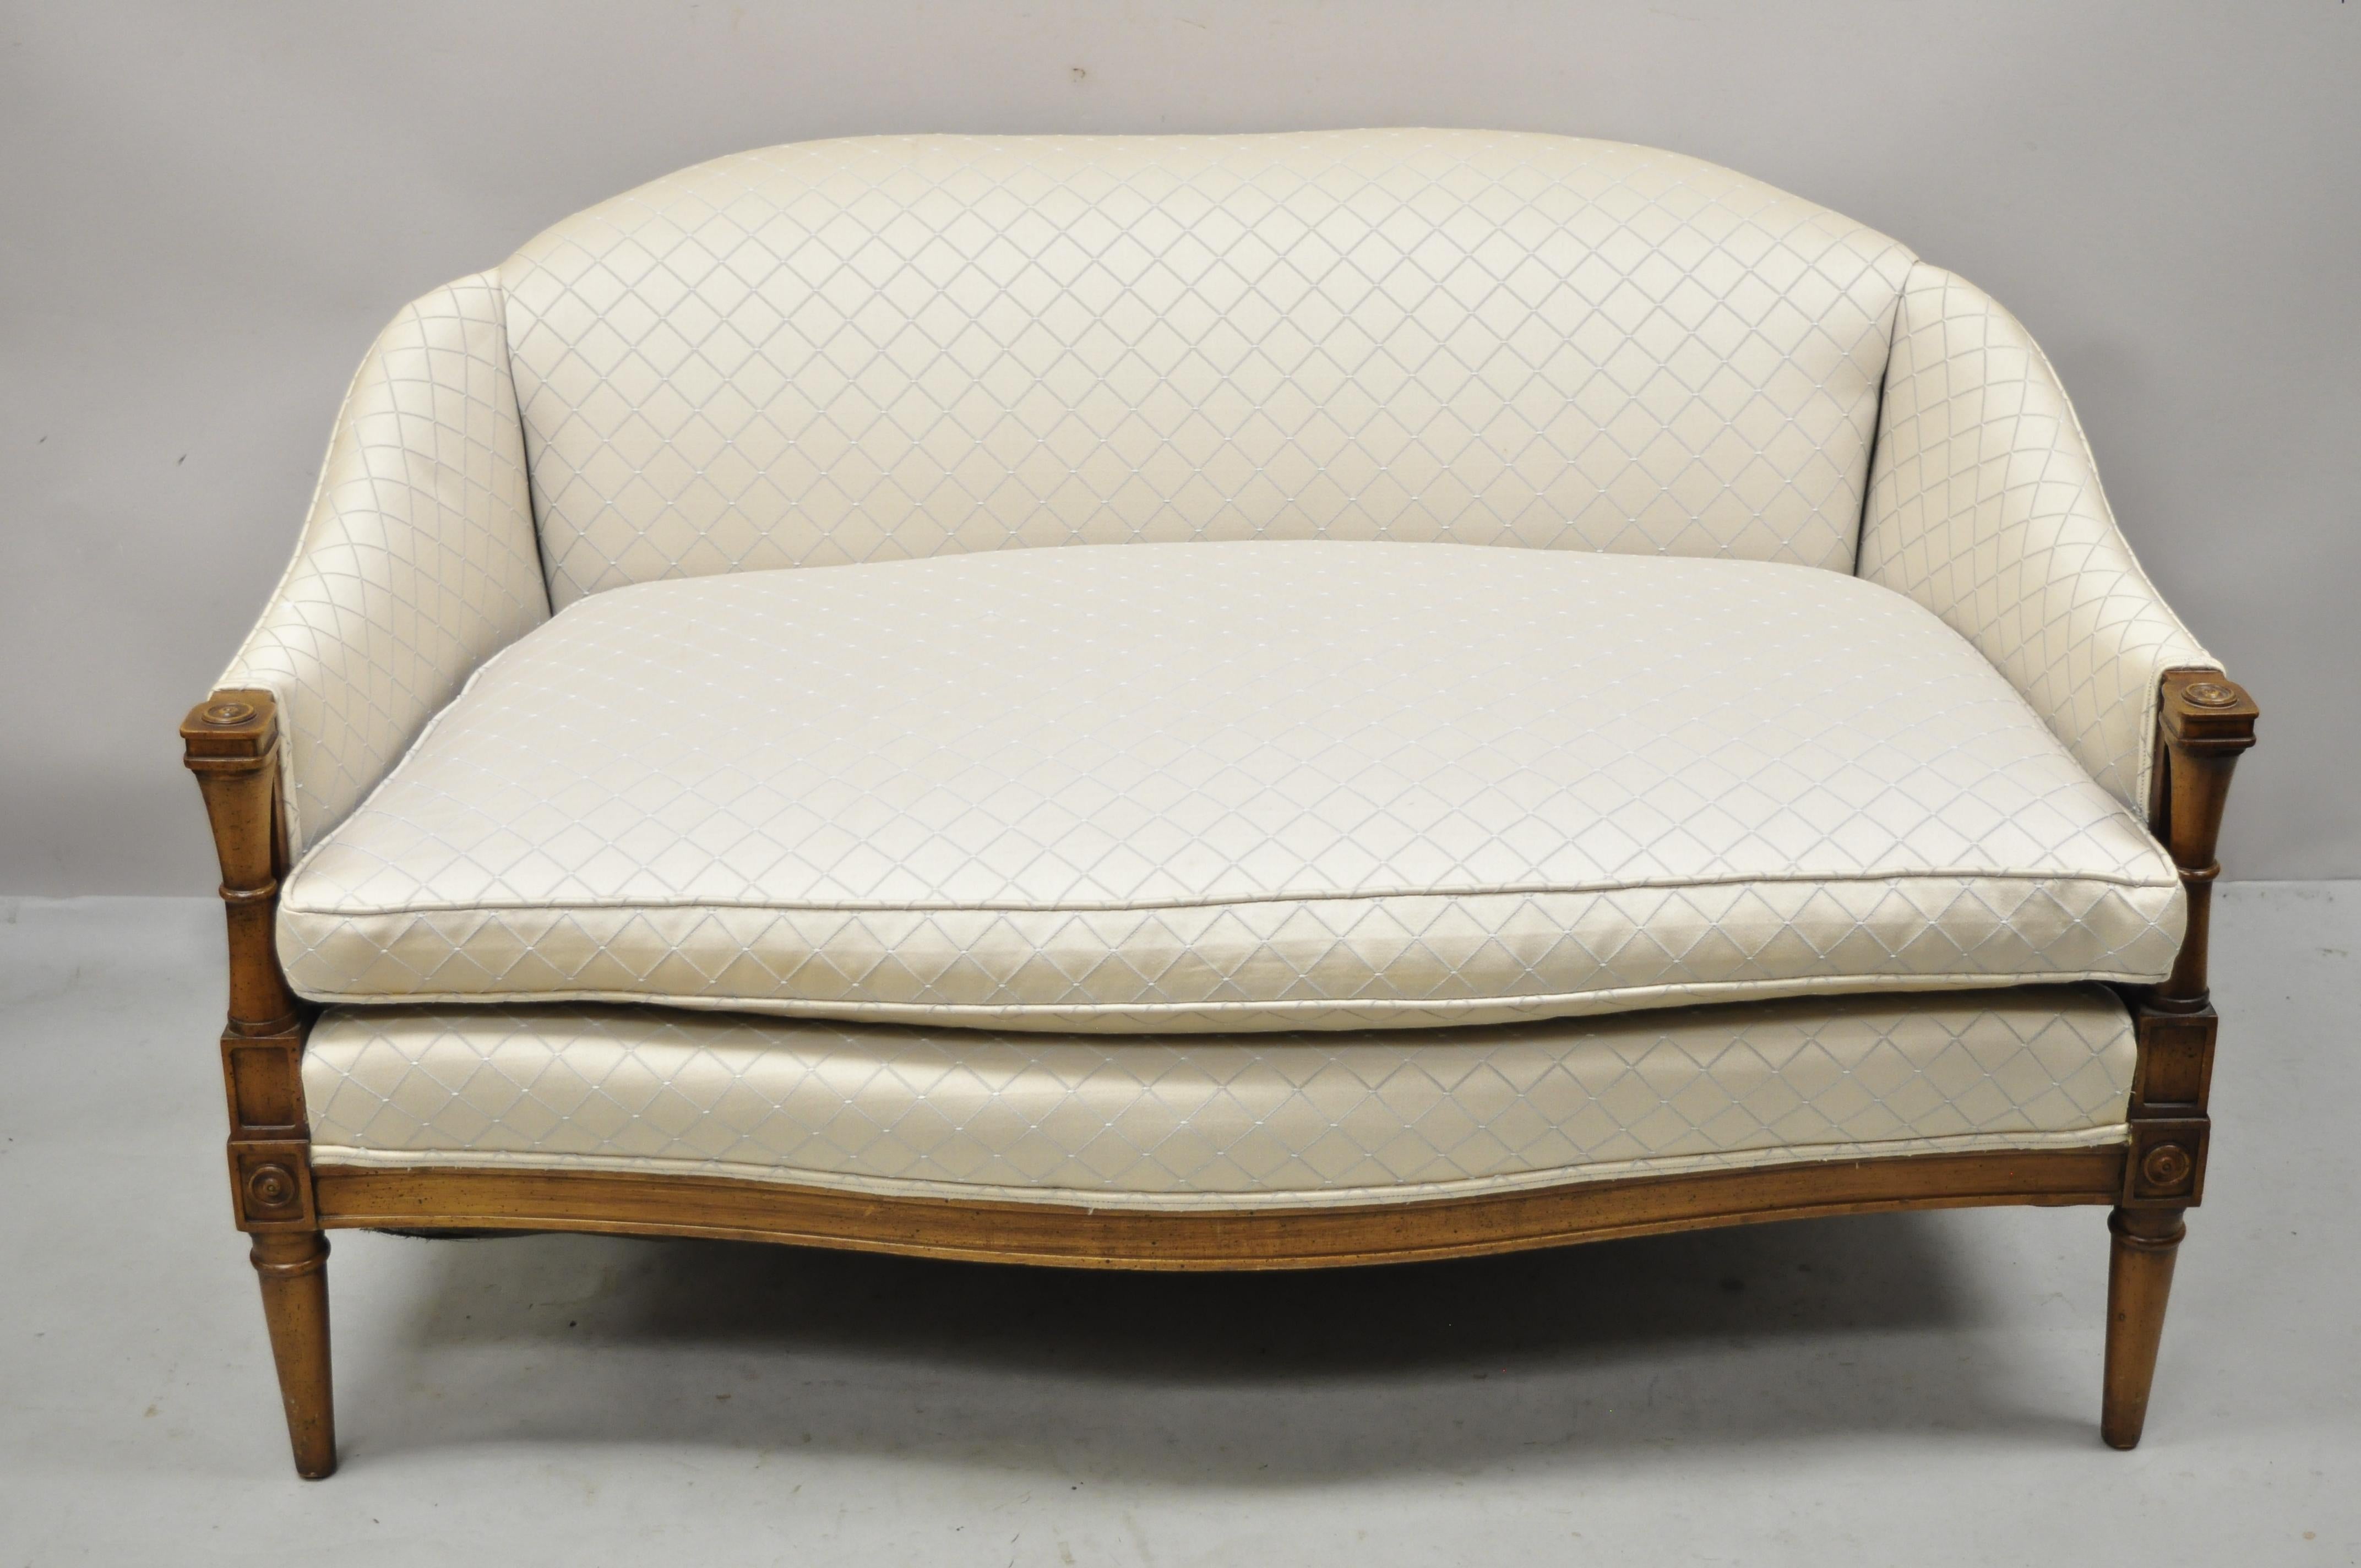 Vintage French Provincial Hollywood Regency upholstered settee loveseat sofa. Item features solid wood frame, distressed finish, nicely carved details, tapered legs, very nice vintage item, quality American craftsmanship, great style and form. Circa